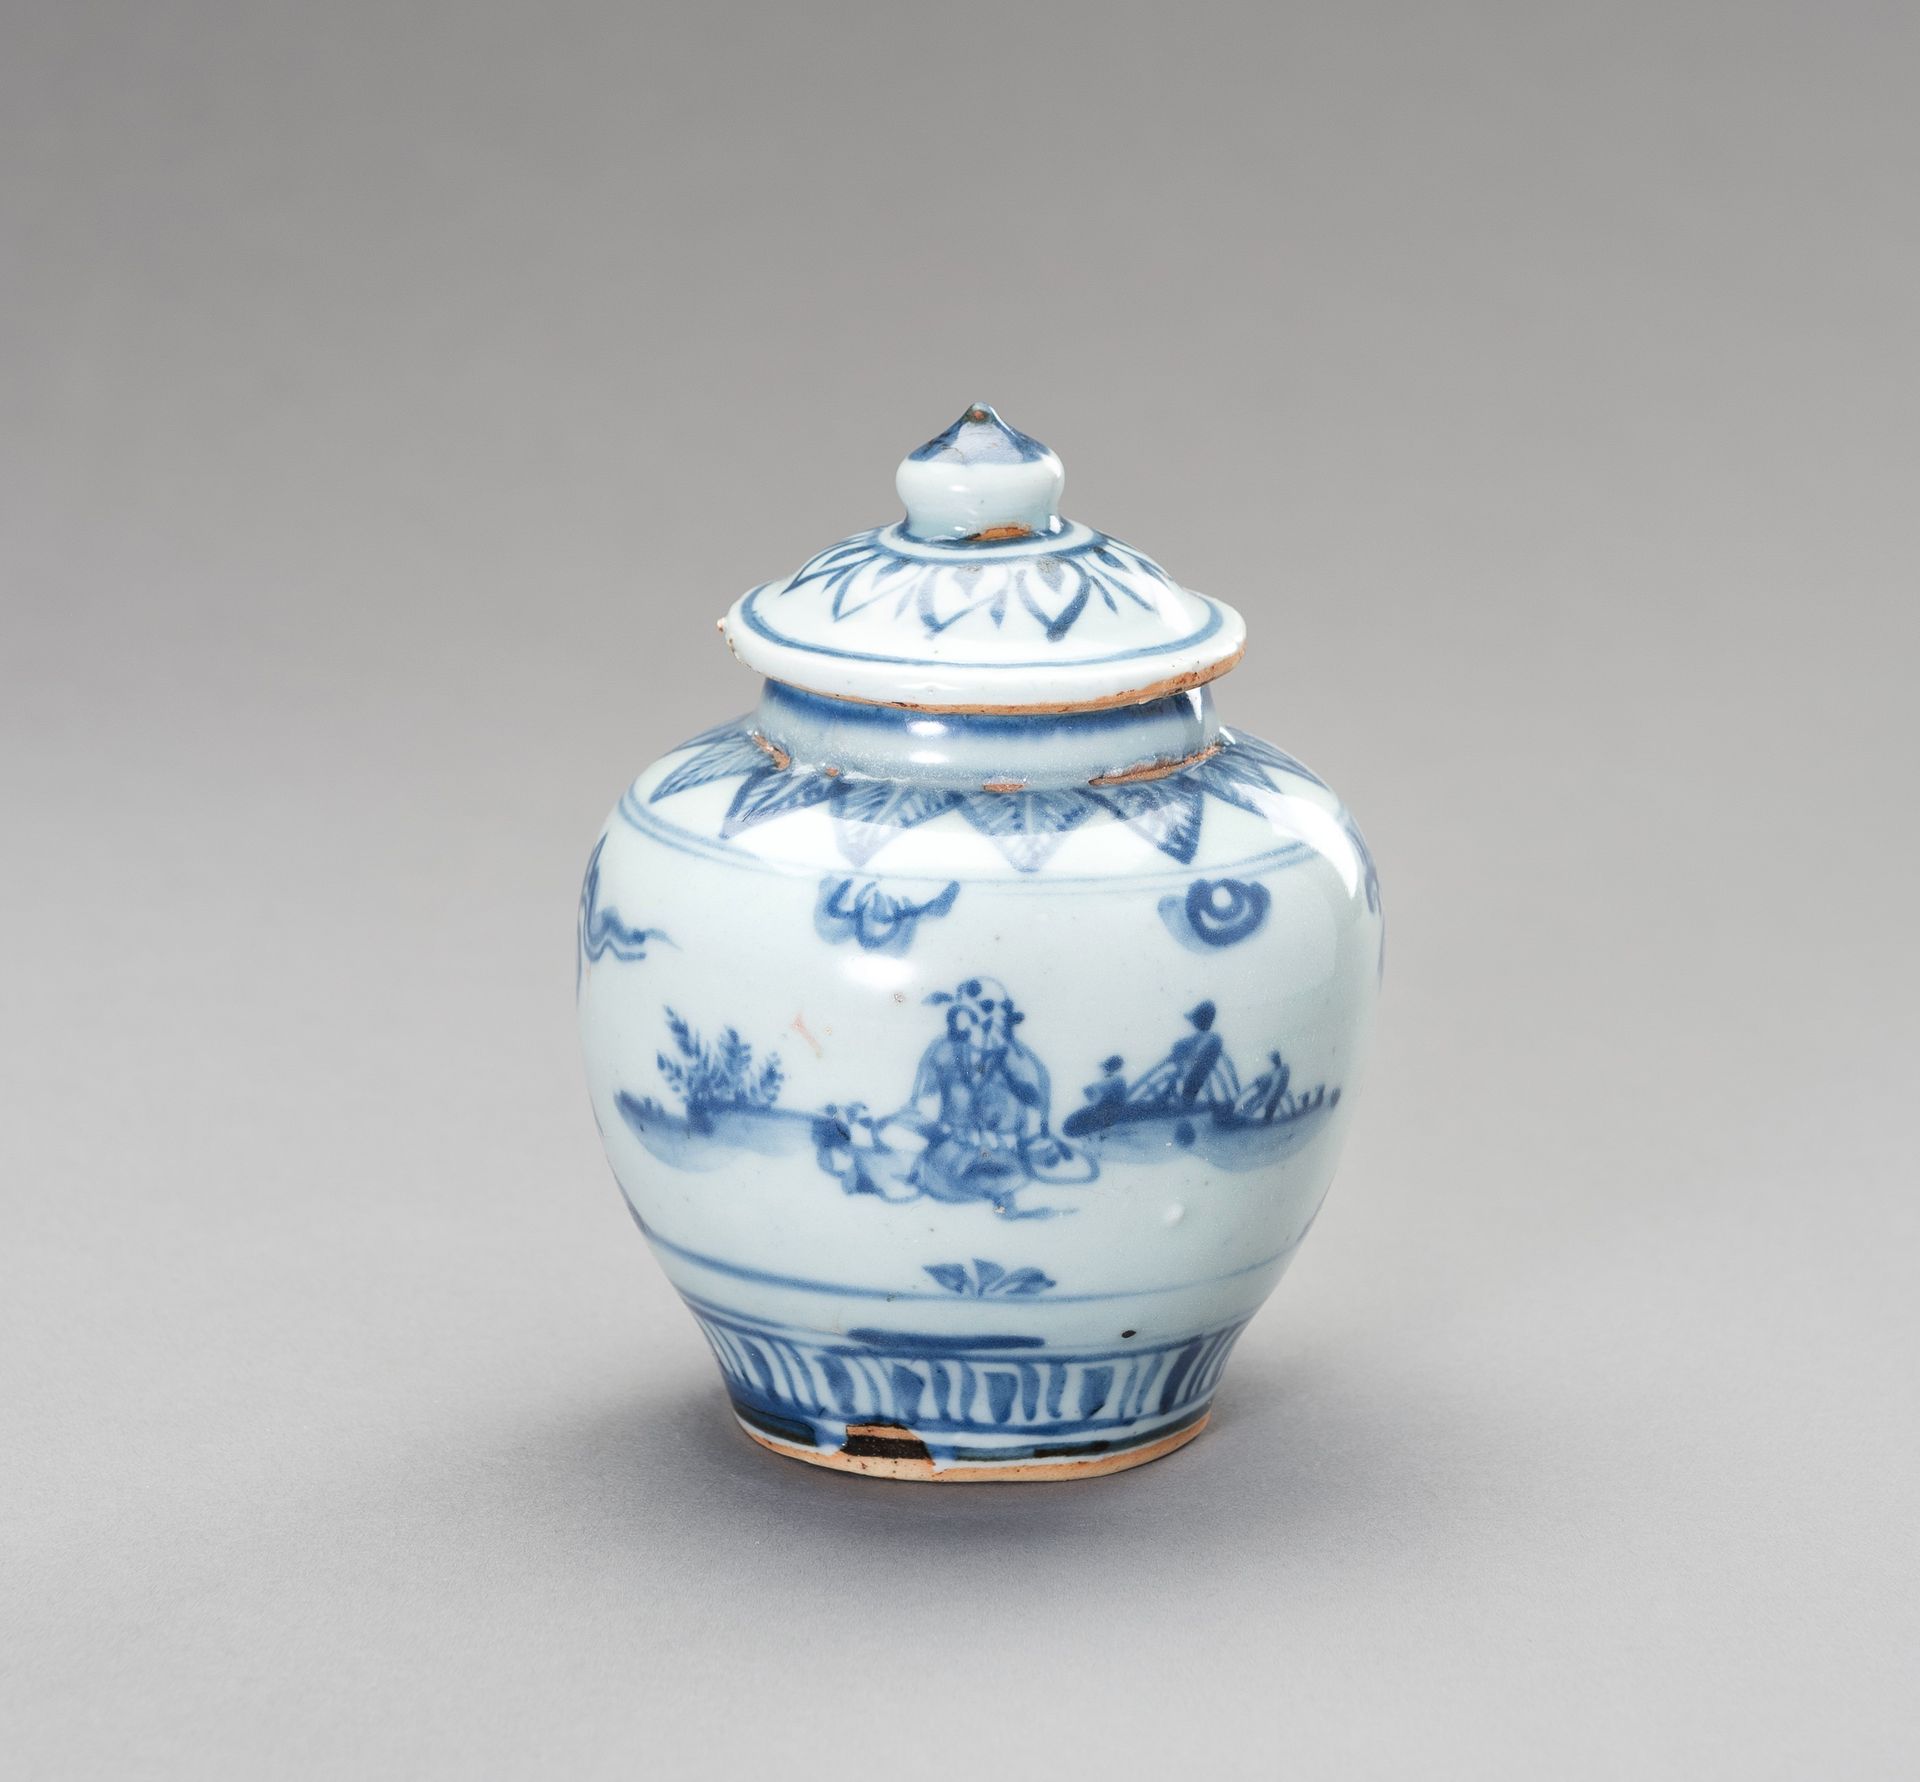 A BLUE AND WHITE 'IMMORTALS' JAR, LATE MING TO TRANSITIONAL PERIOD BLAUES UND WE&hellip;